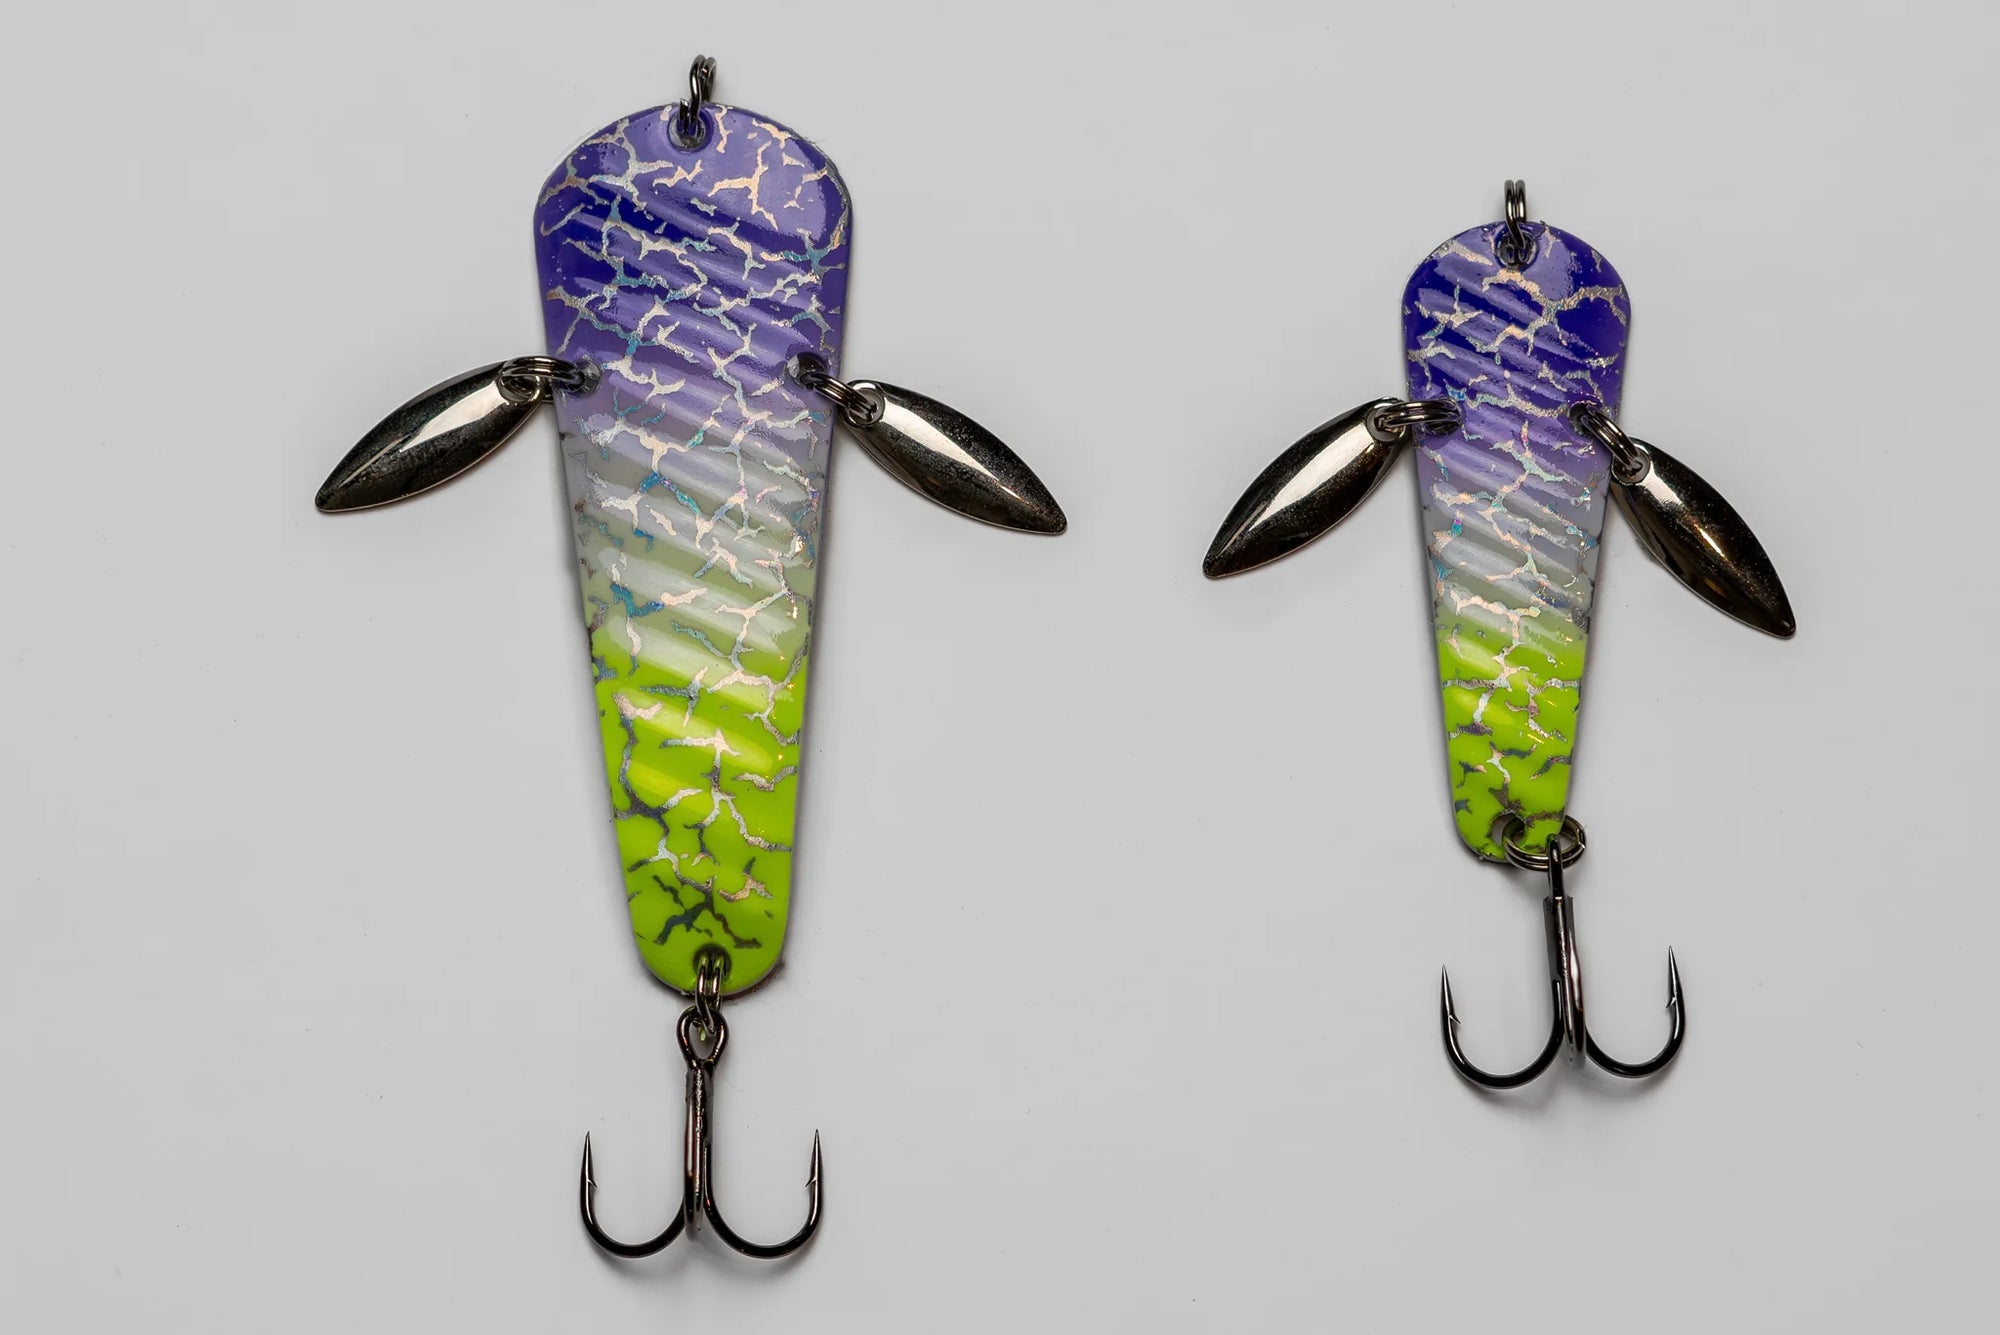 Best Selling Products Tagged Ice Fishing - LOTWSHQ